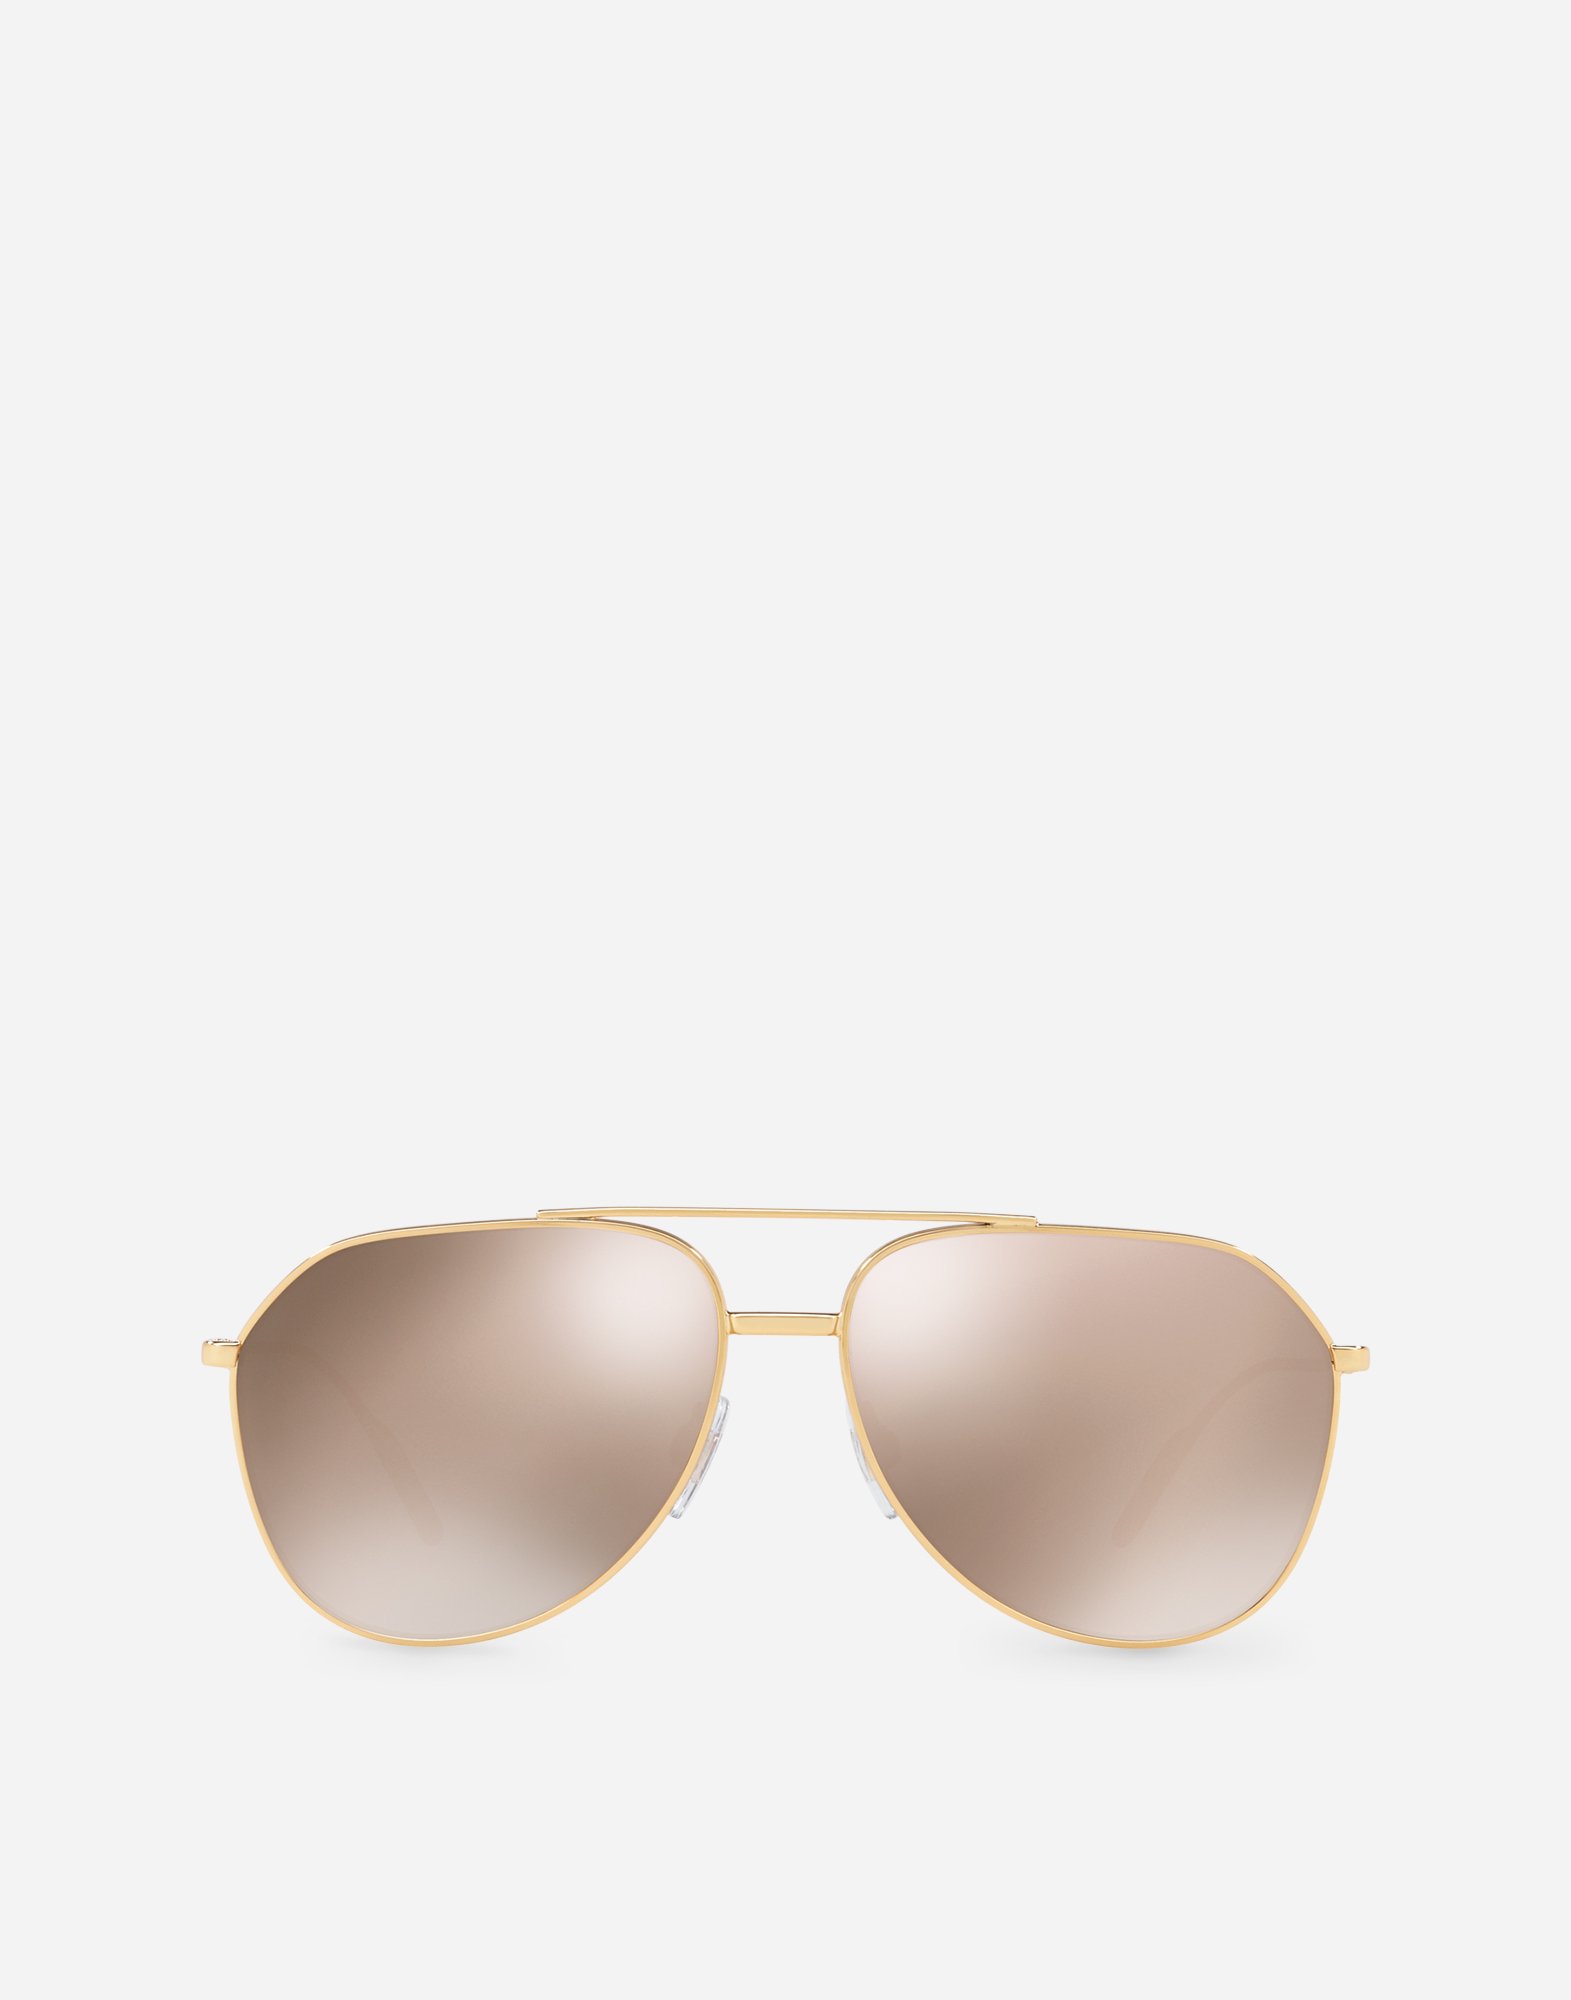 dolce and gabbana sunglasses mens gold